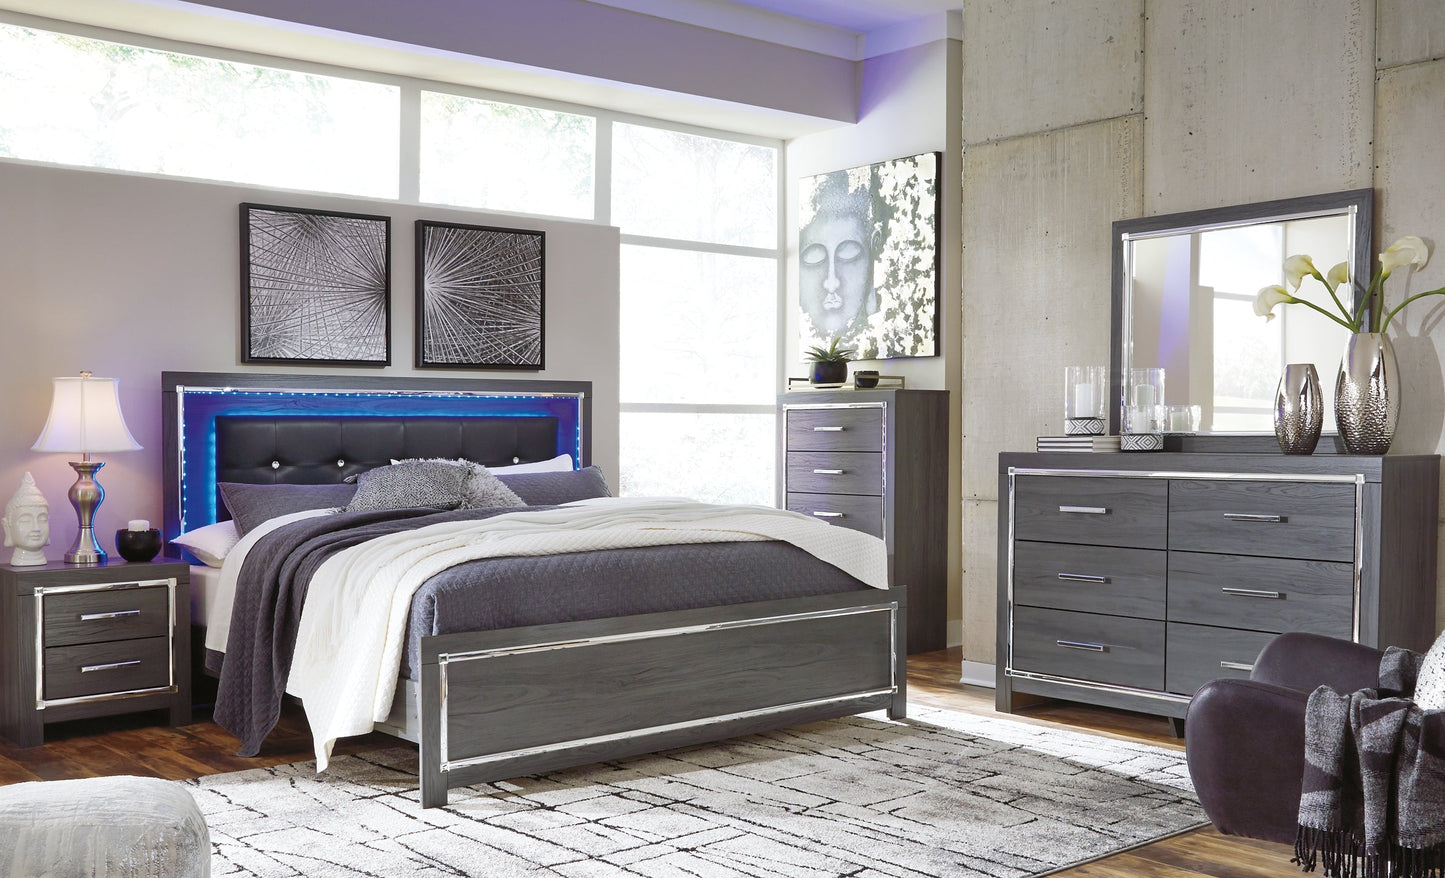 Lodanna Queen Panel Bed at Walker Mattress and Furniture Locations in Cedar Park and Belton TX.